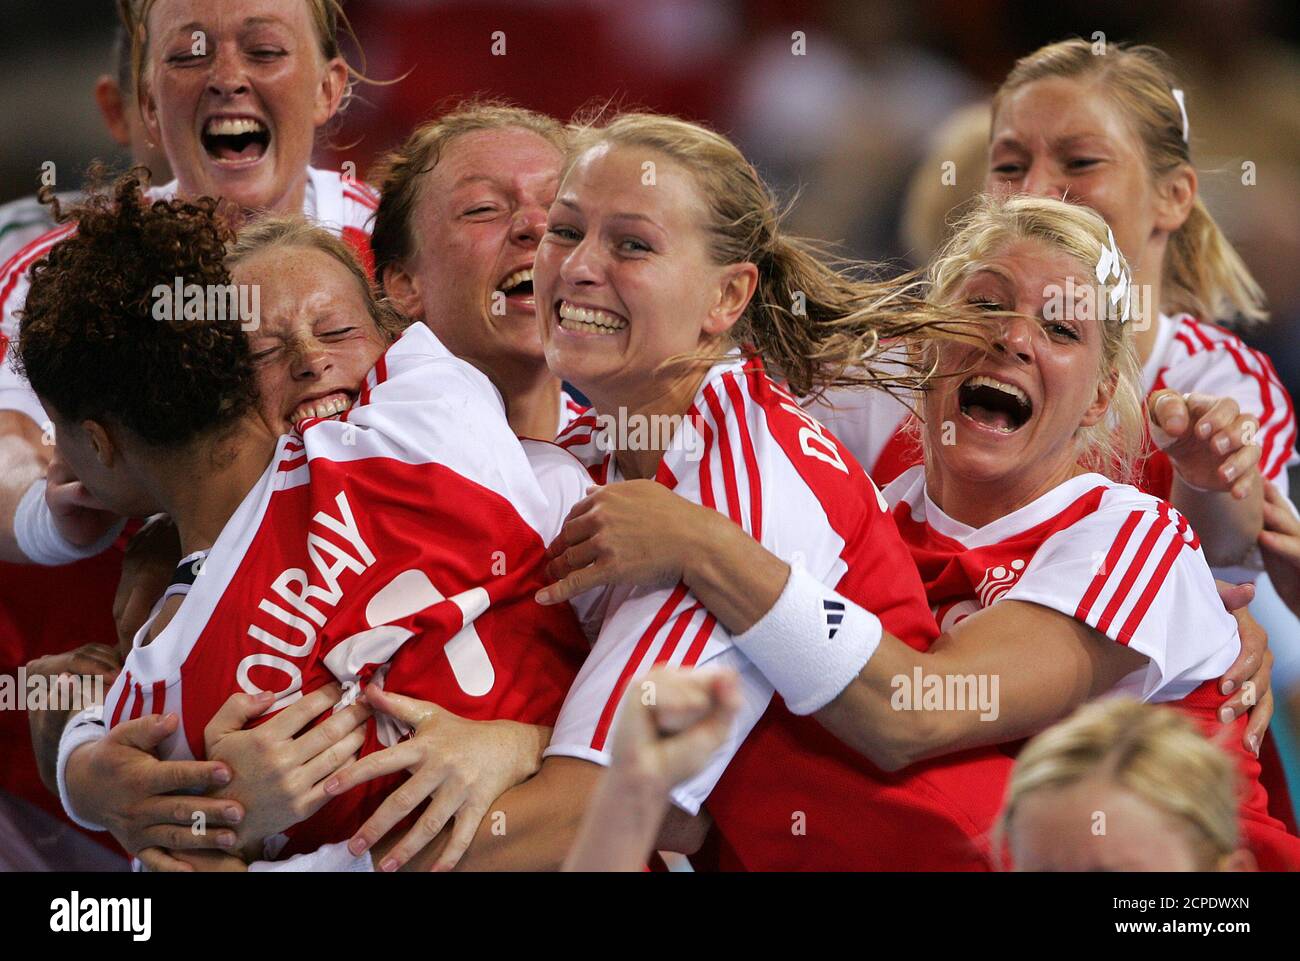 Denmark's Olympic champions Line Daugaard (C) and Rikke Hoerlykke  Joergensen (R) celebrate their gold medal win after they defeated South  Korea in the women's handball finals match at the Athens 2004 Olympic